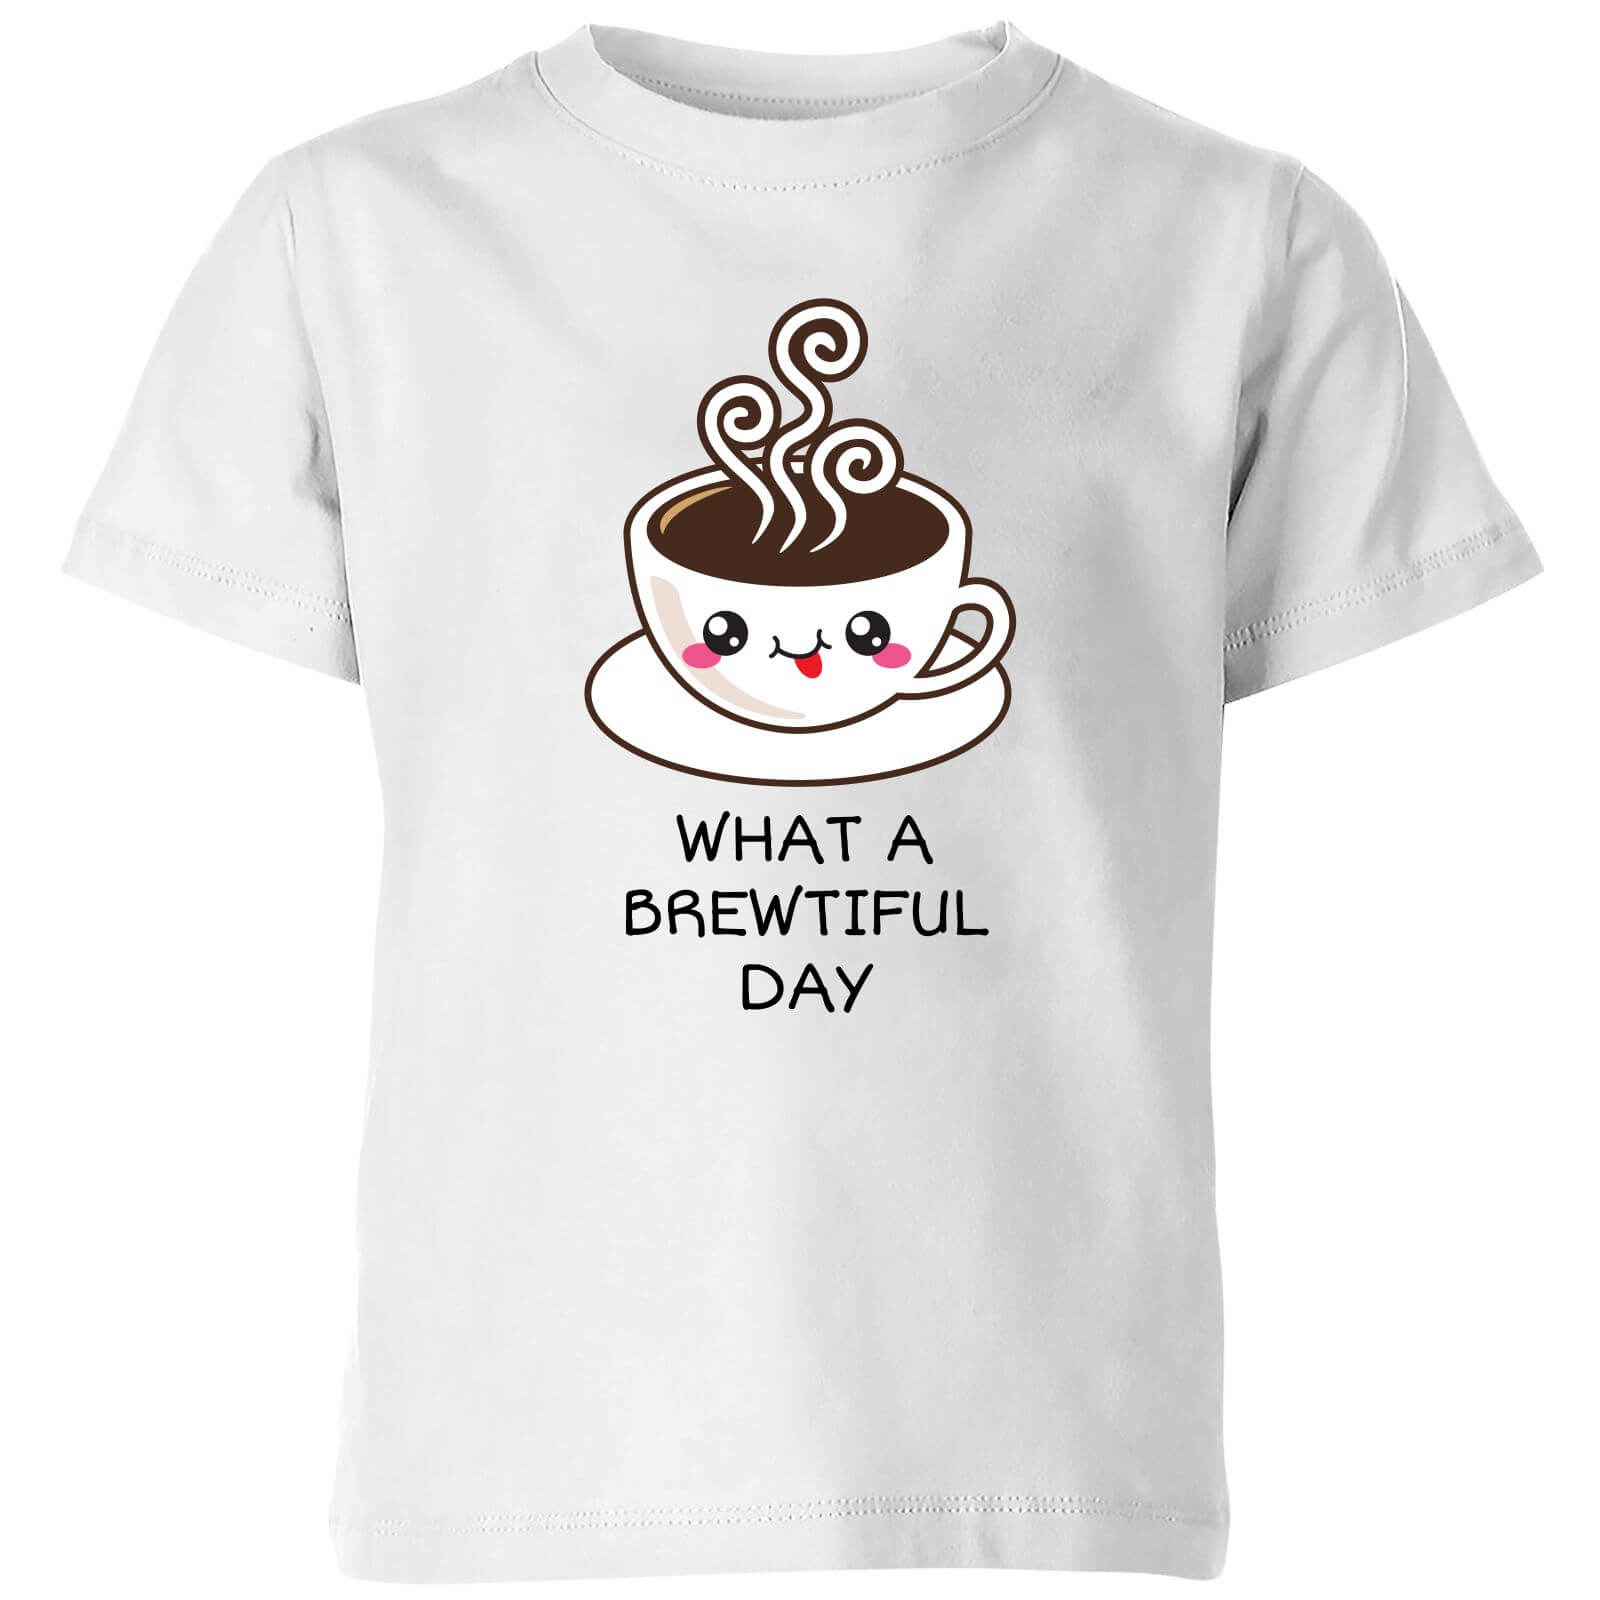 My Little Rascal What A Brewtiful Day Kids' T-Shirt - White - 3-4 Years - White